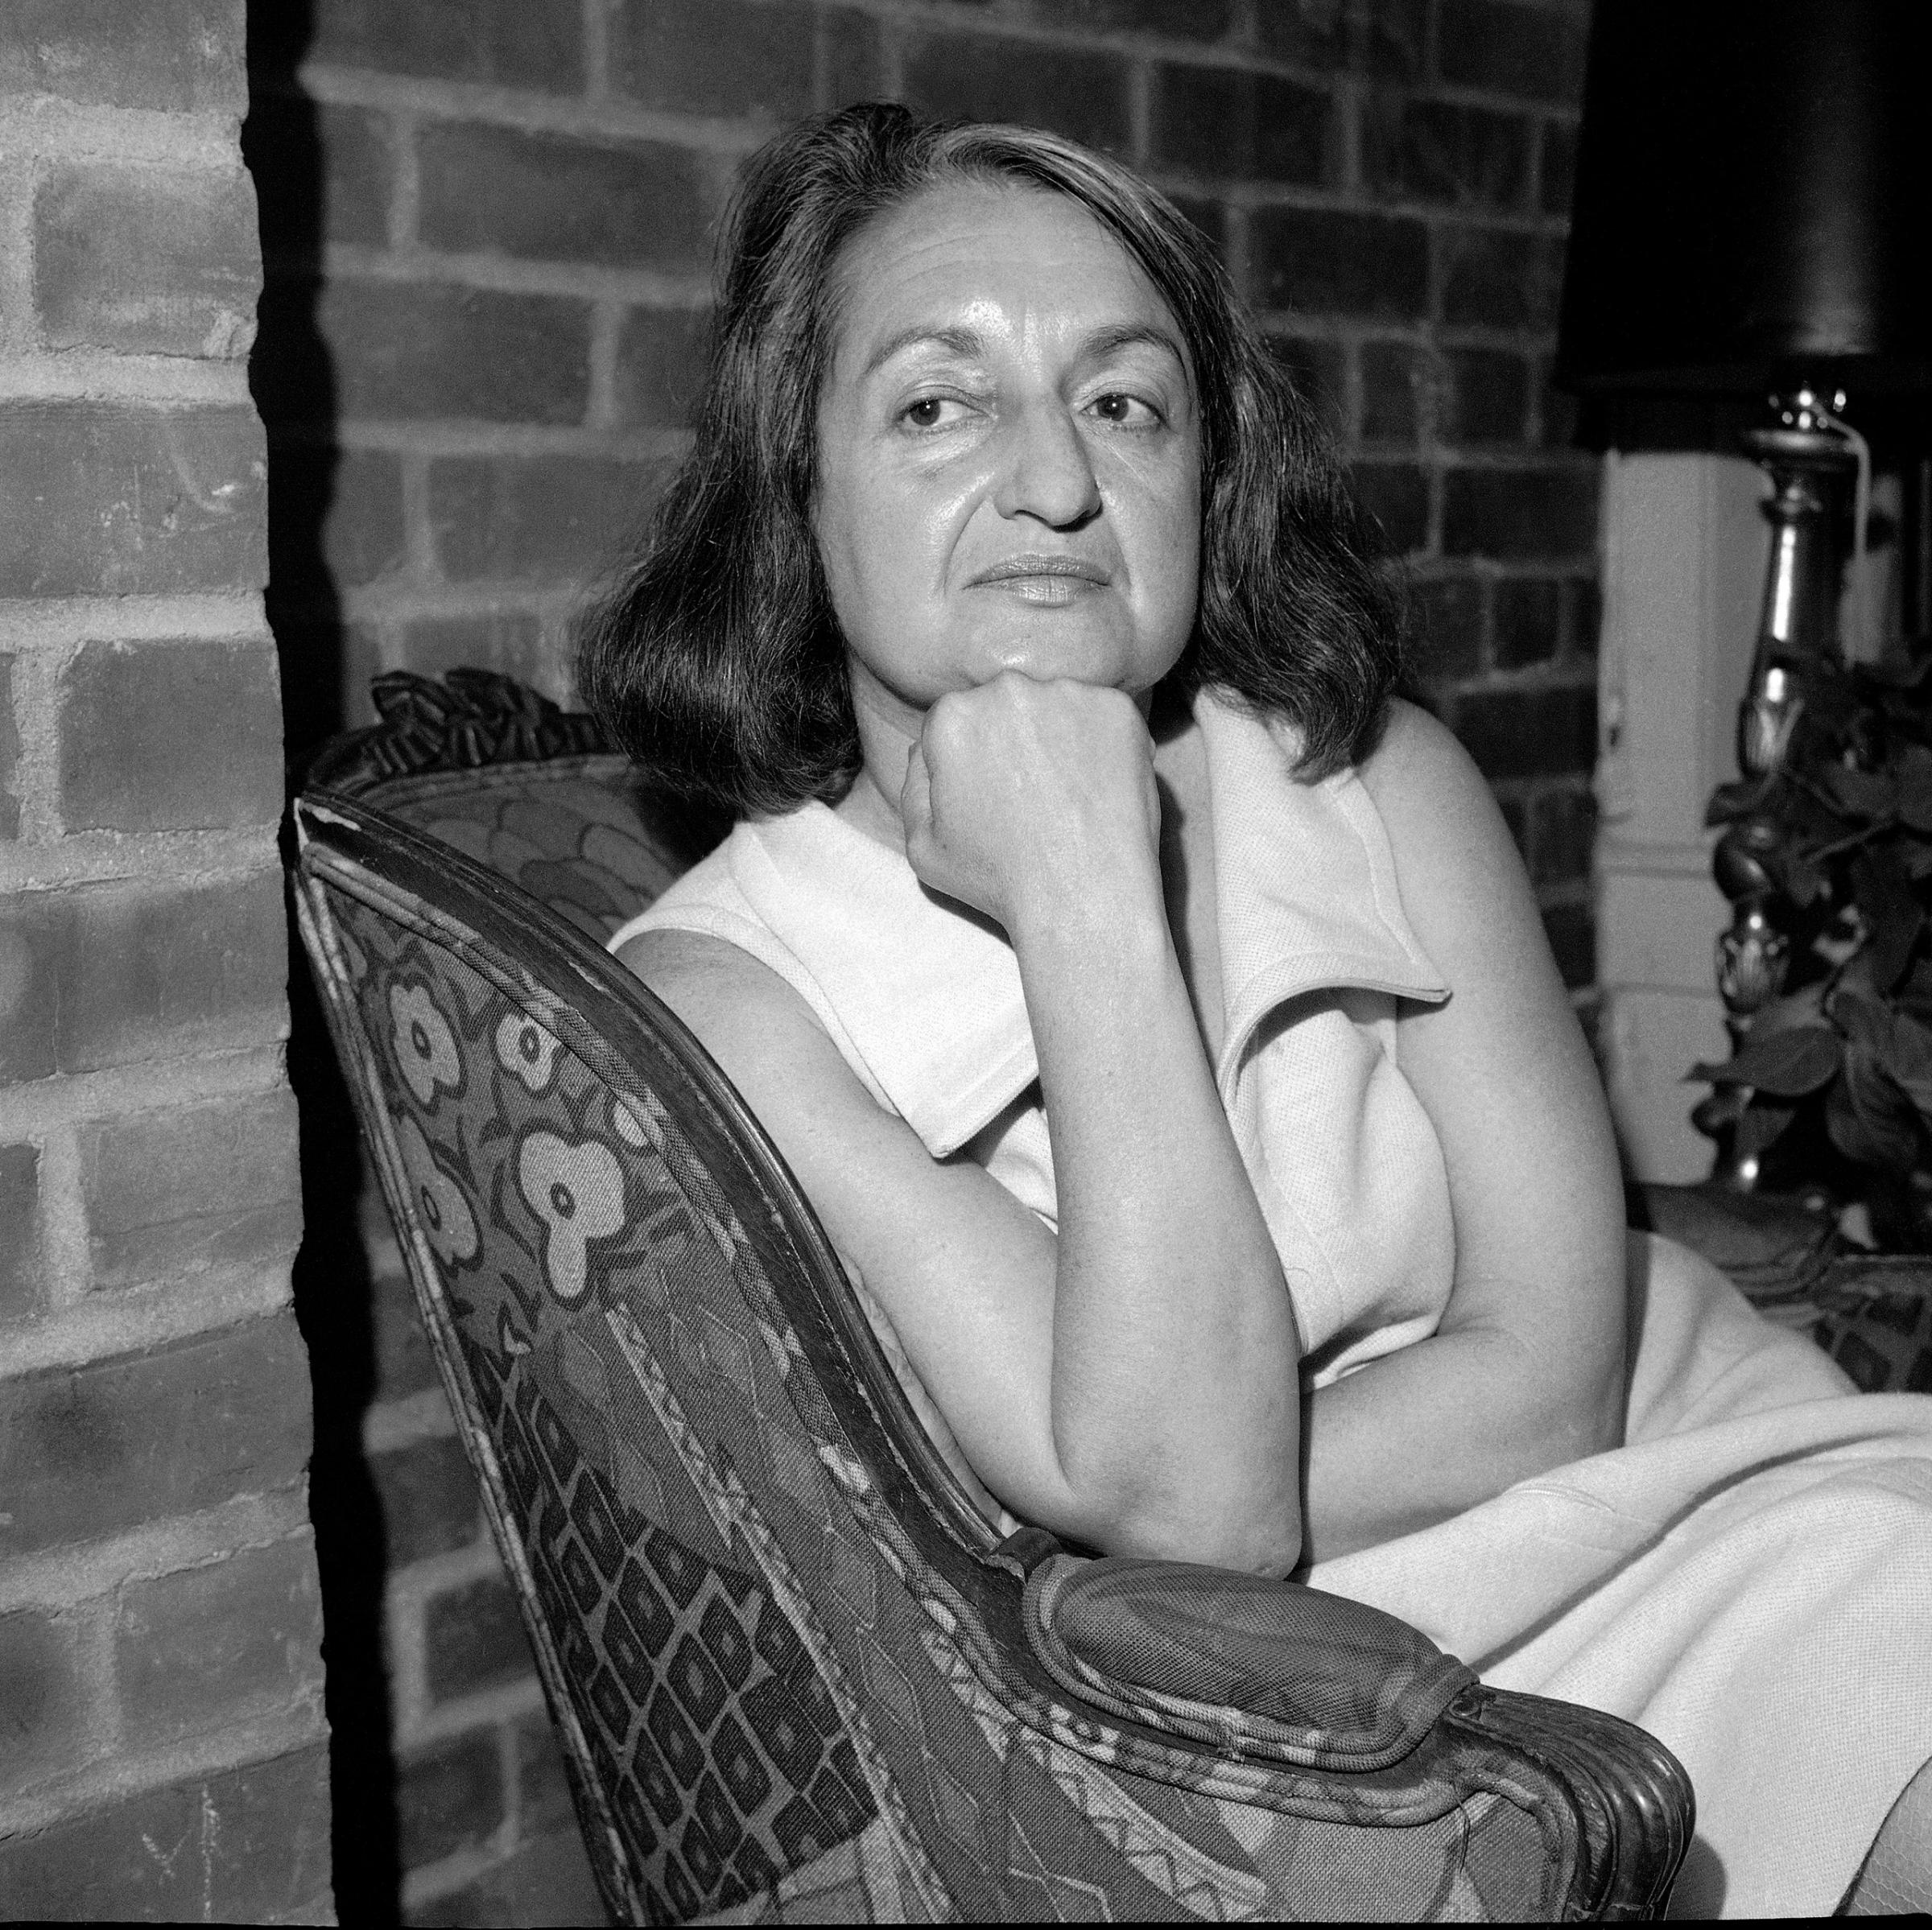 Betty Friedan at a press interview on May 25, 1970. Friedan is a feminist, activist, writer, best known for her 1963 book, "The Feminine Mystique."